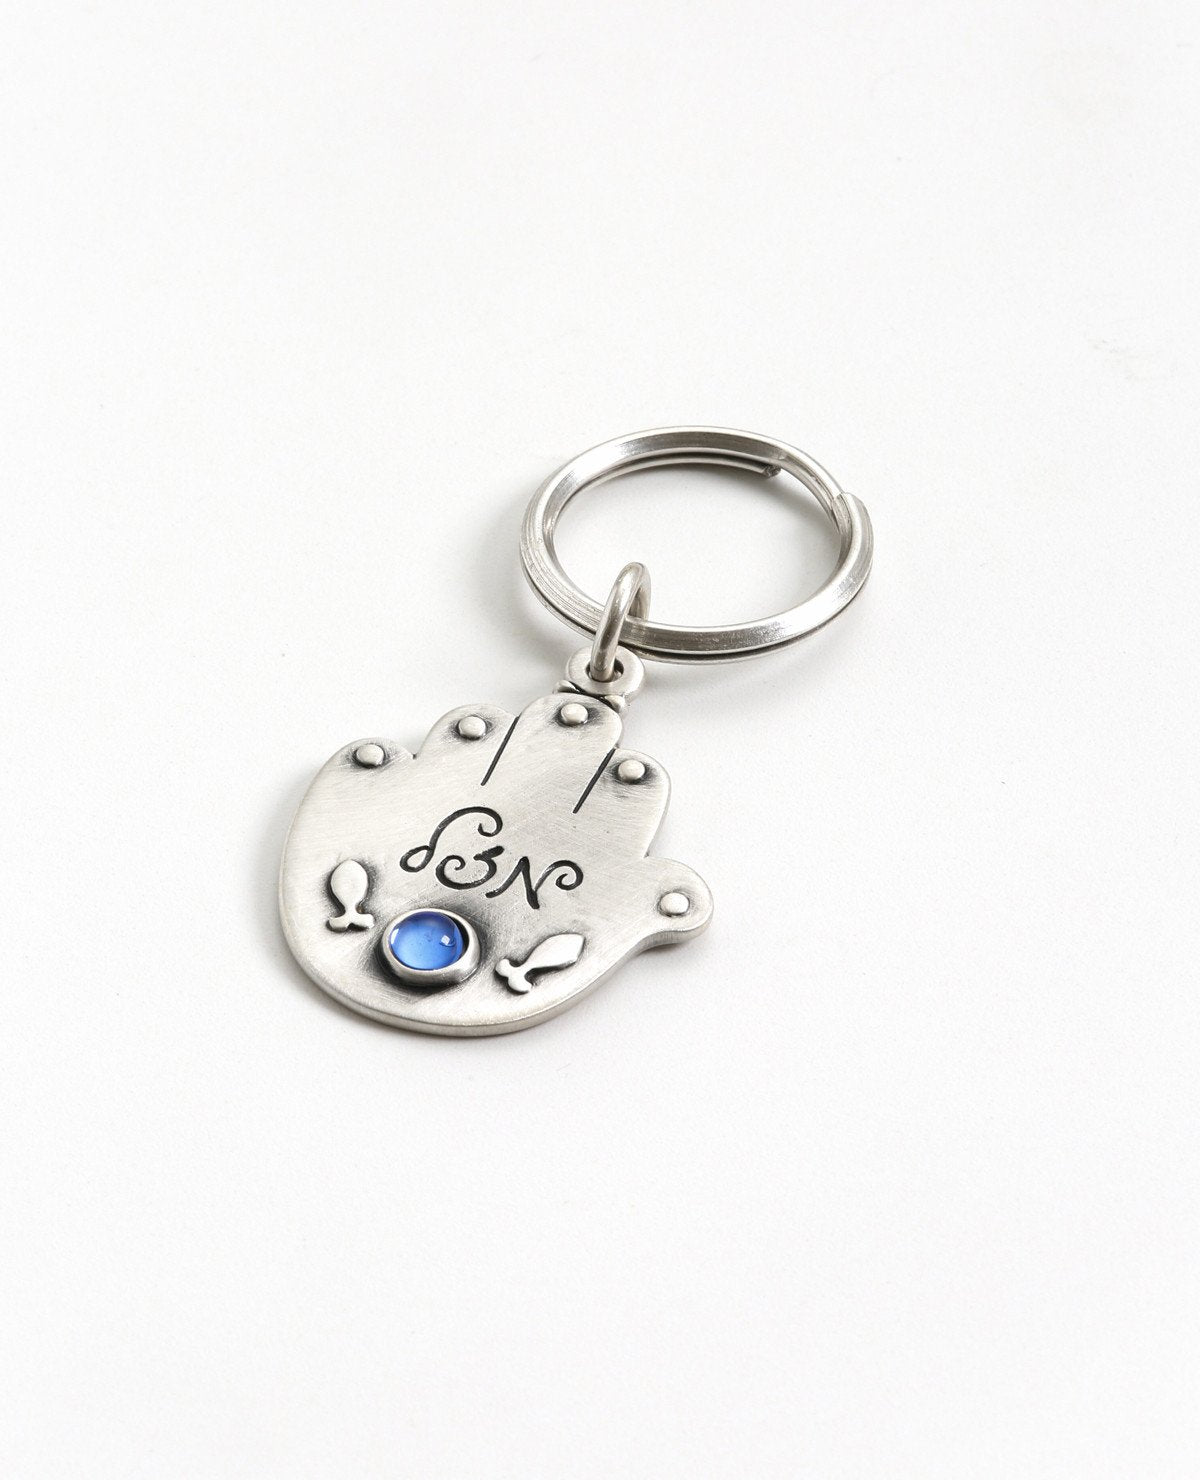 An exciting double-sided Hamsa keychain. On one side of the Hamsa the words "Good journey and safe travels!" are written. Written on the other side is the word "Luck" with a blue stone embedded underneath, and next to it an embossed image of two fish.
The Hamsa is coated in sterling silver and is strong and reliable to accompany your loved ones throughout the entire journey. A charming and loving gift for anyone about to embark on a trip in the voyage of life. A present that will leave our loved ones with a